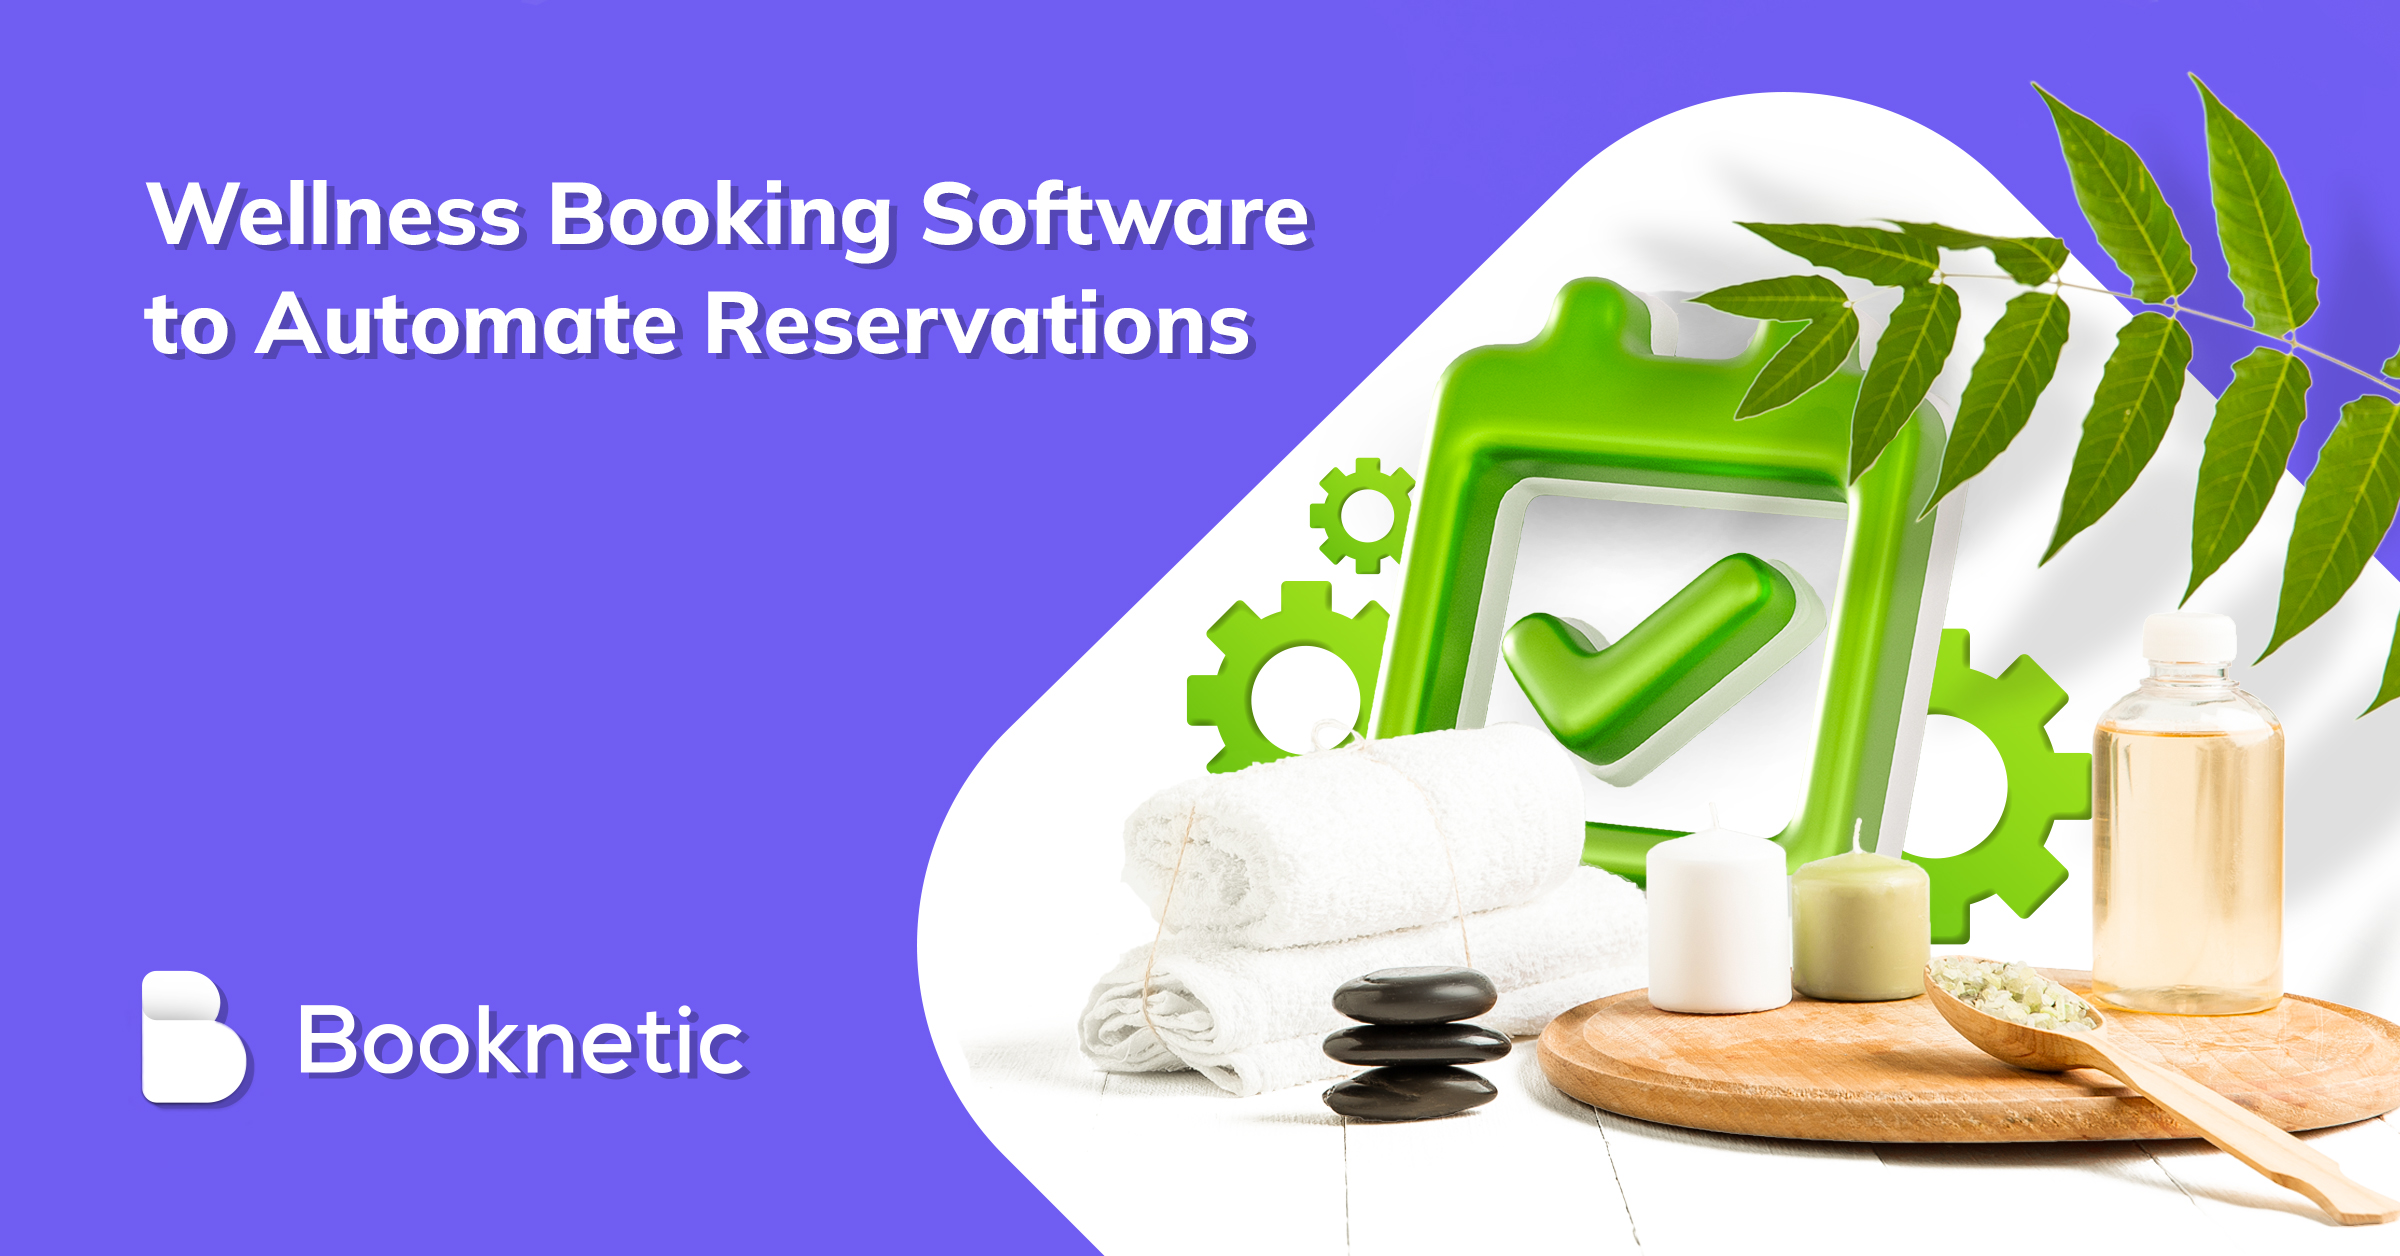 Top 12 Wellness Booking Software to Automate Reservations